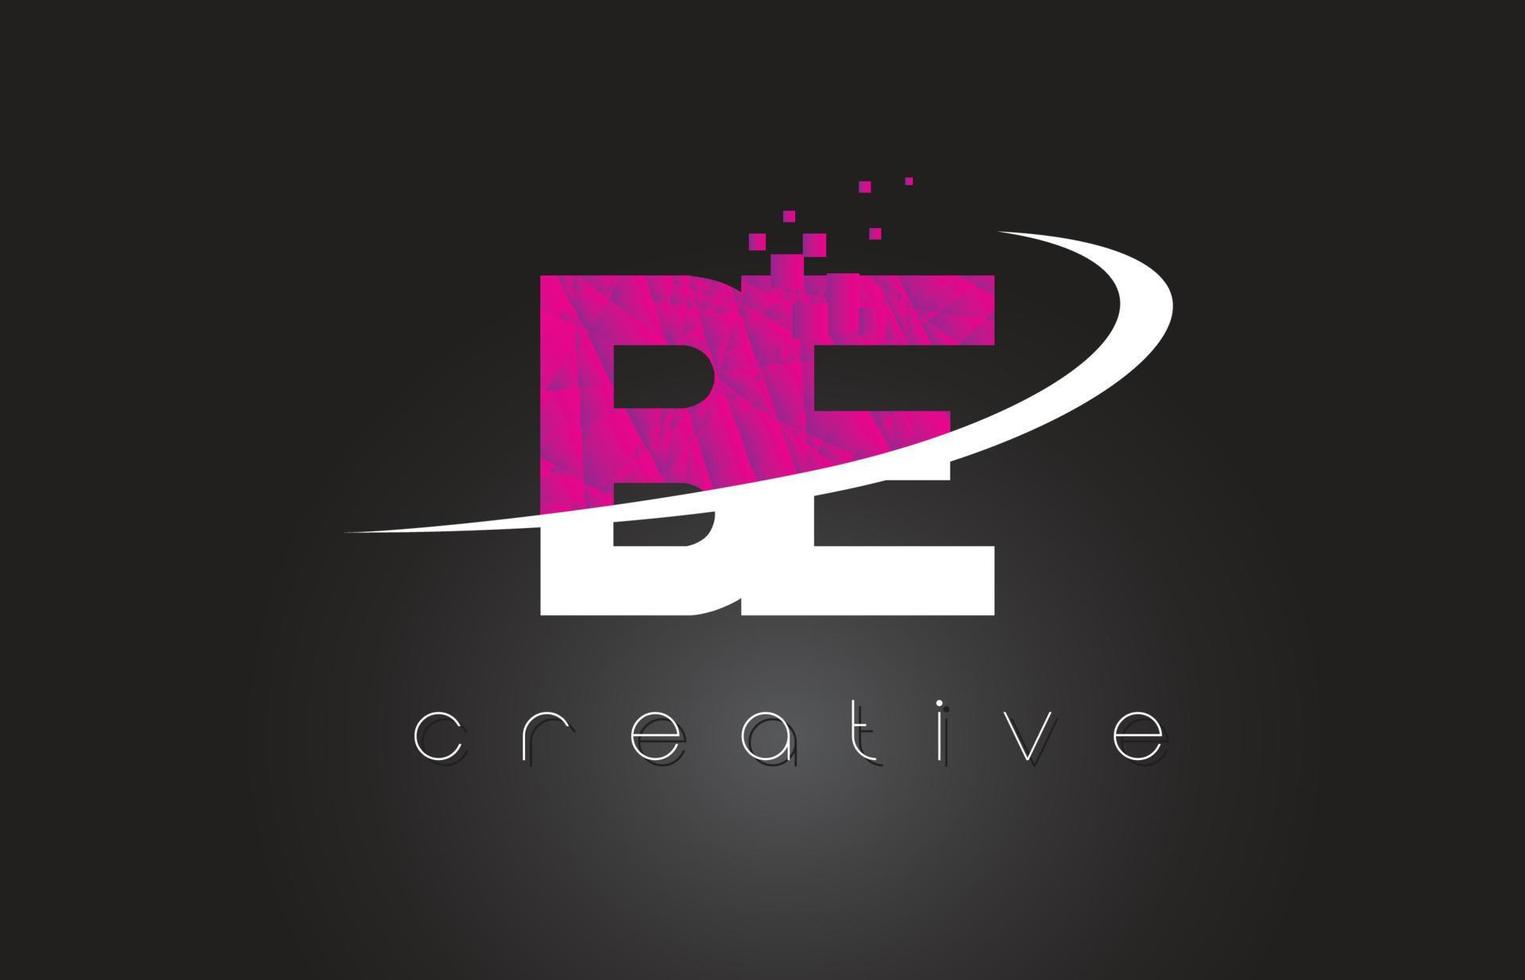 BE B E Creative Letters Design With White Pink Colors vector